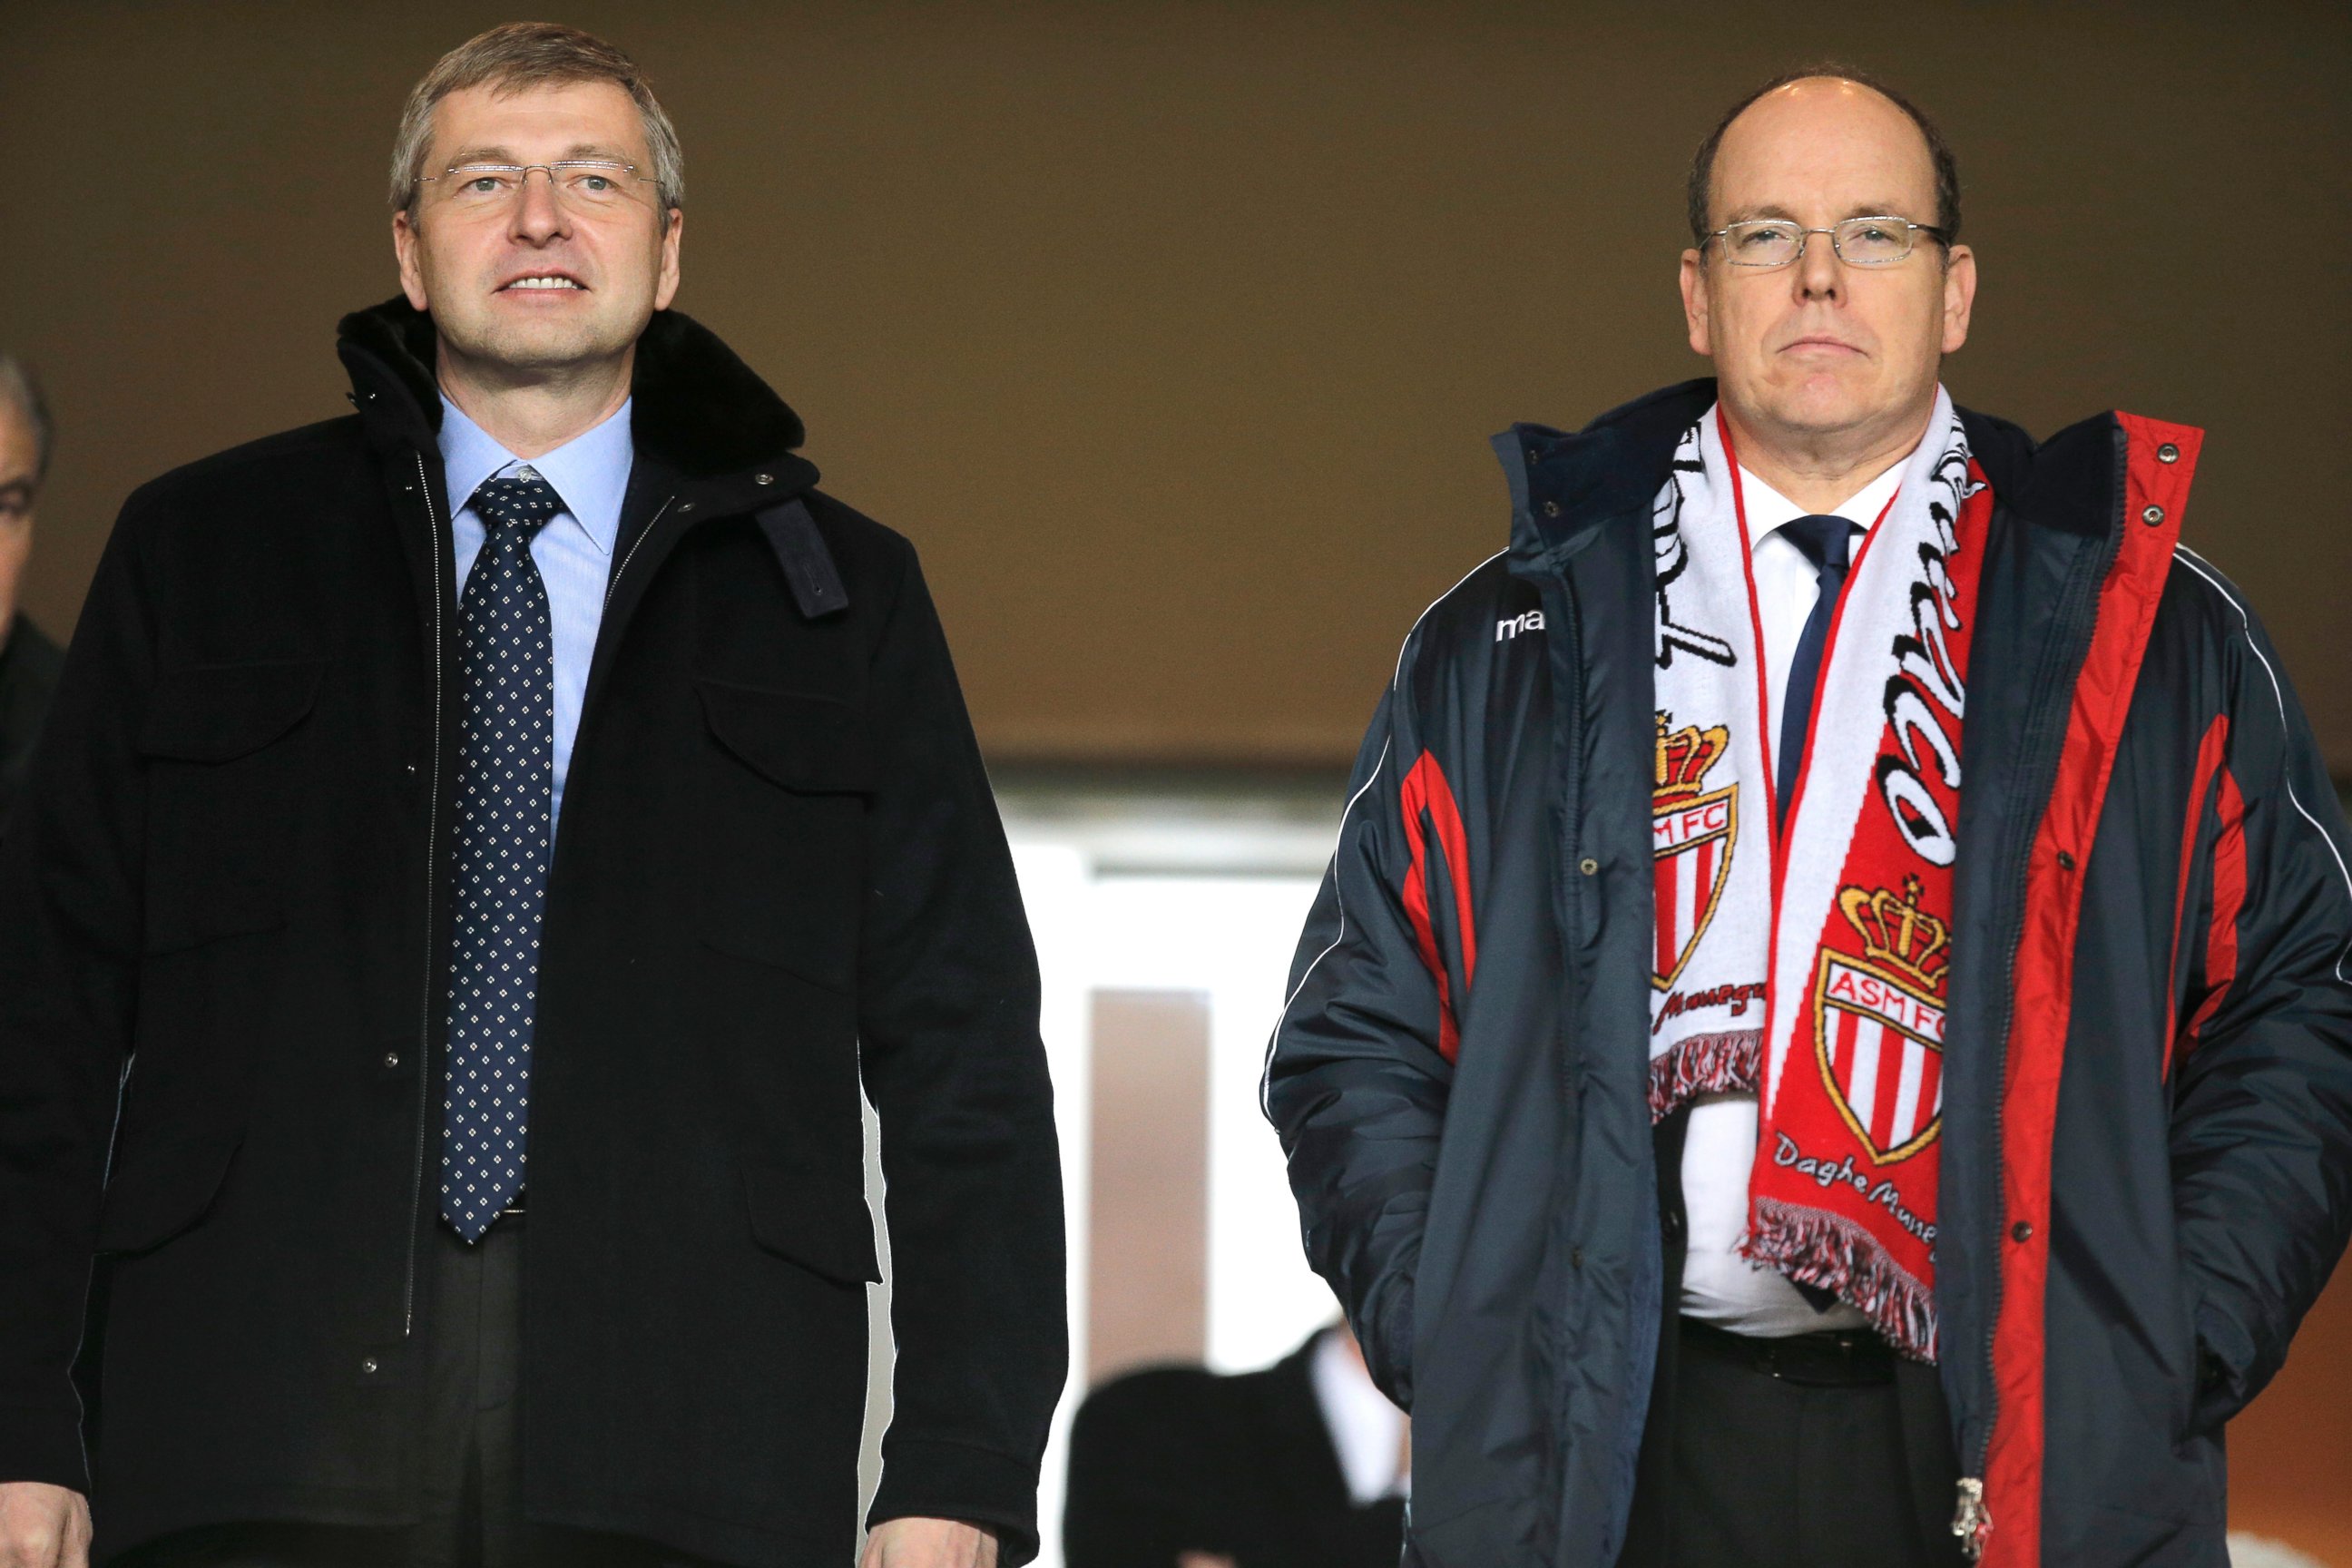 PHOTO: President of AS Monaco Dmitry Rybolovlev, left, and Prince Albert II Of Monaco, as they attend the French League One soccer match Monaco vs Marseille, in Monaco stadium in this Jan. 26, 2014 file photo.